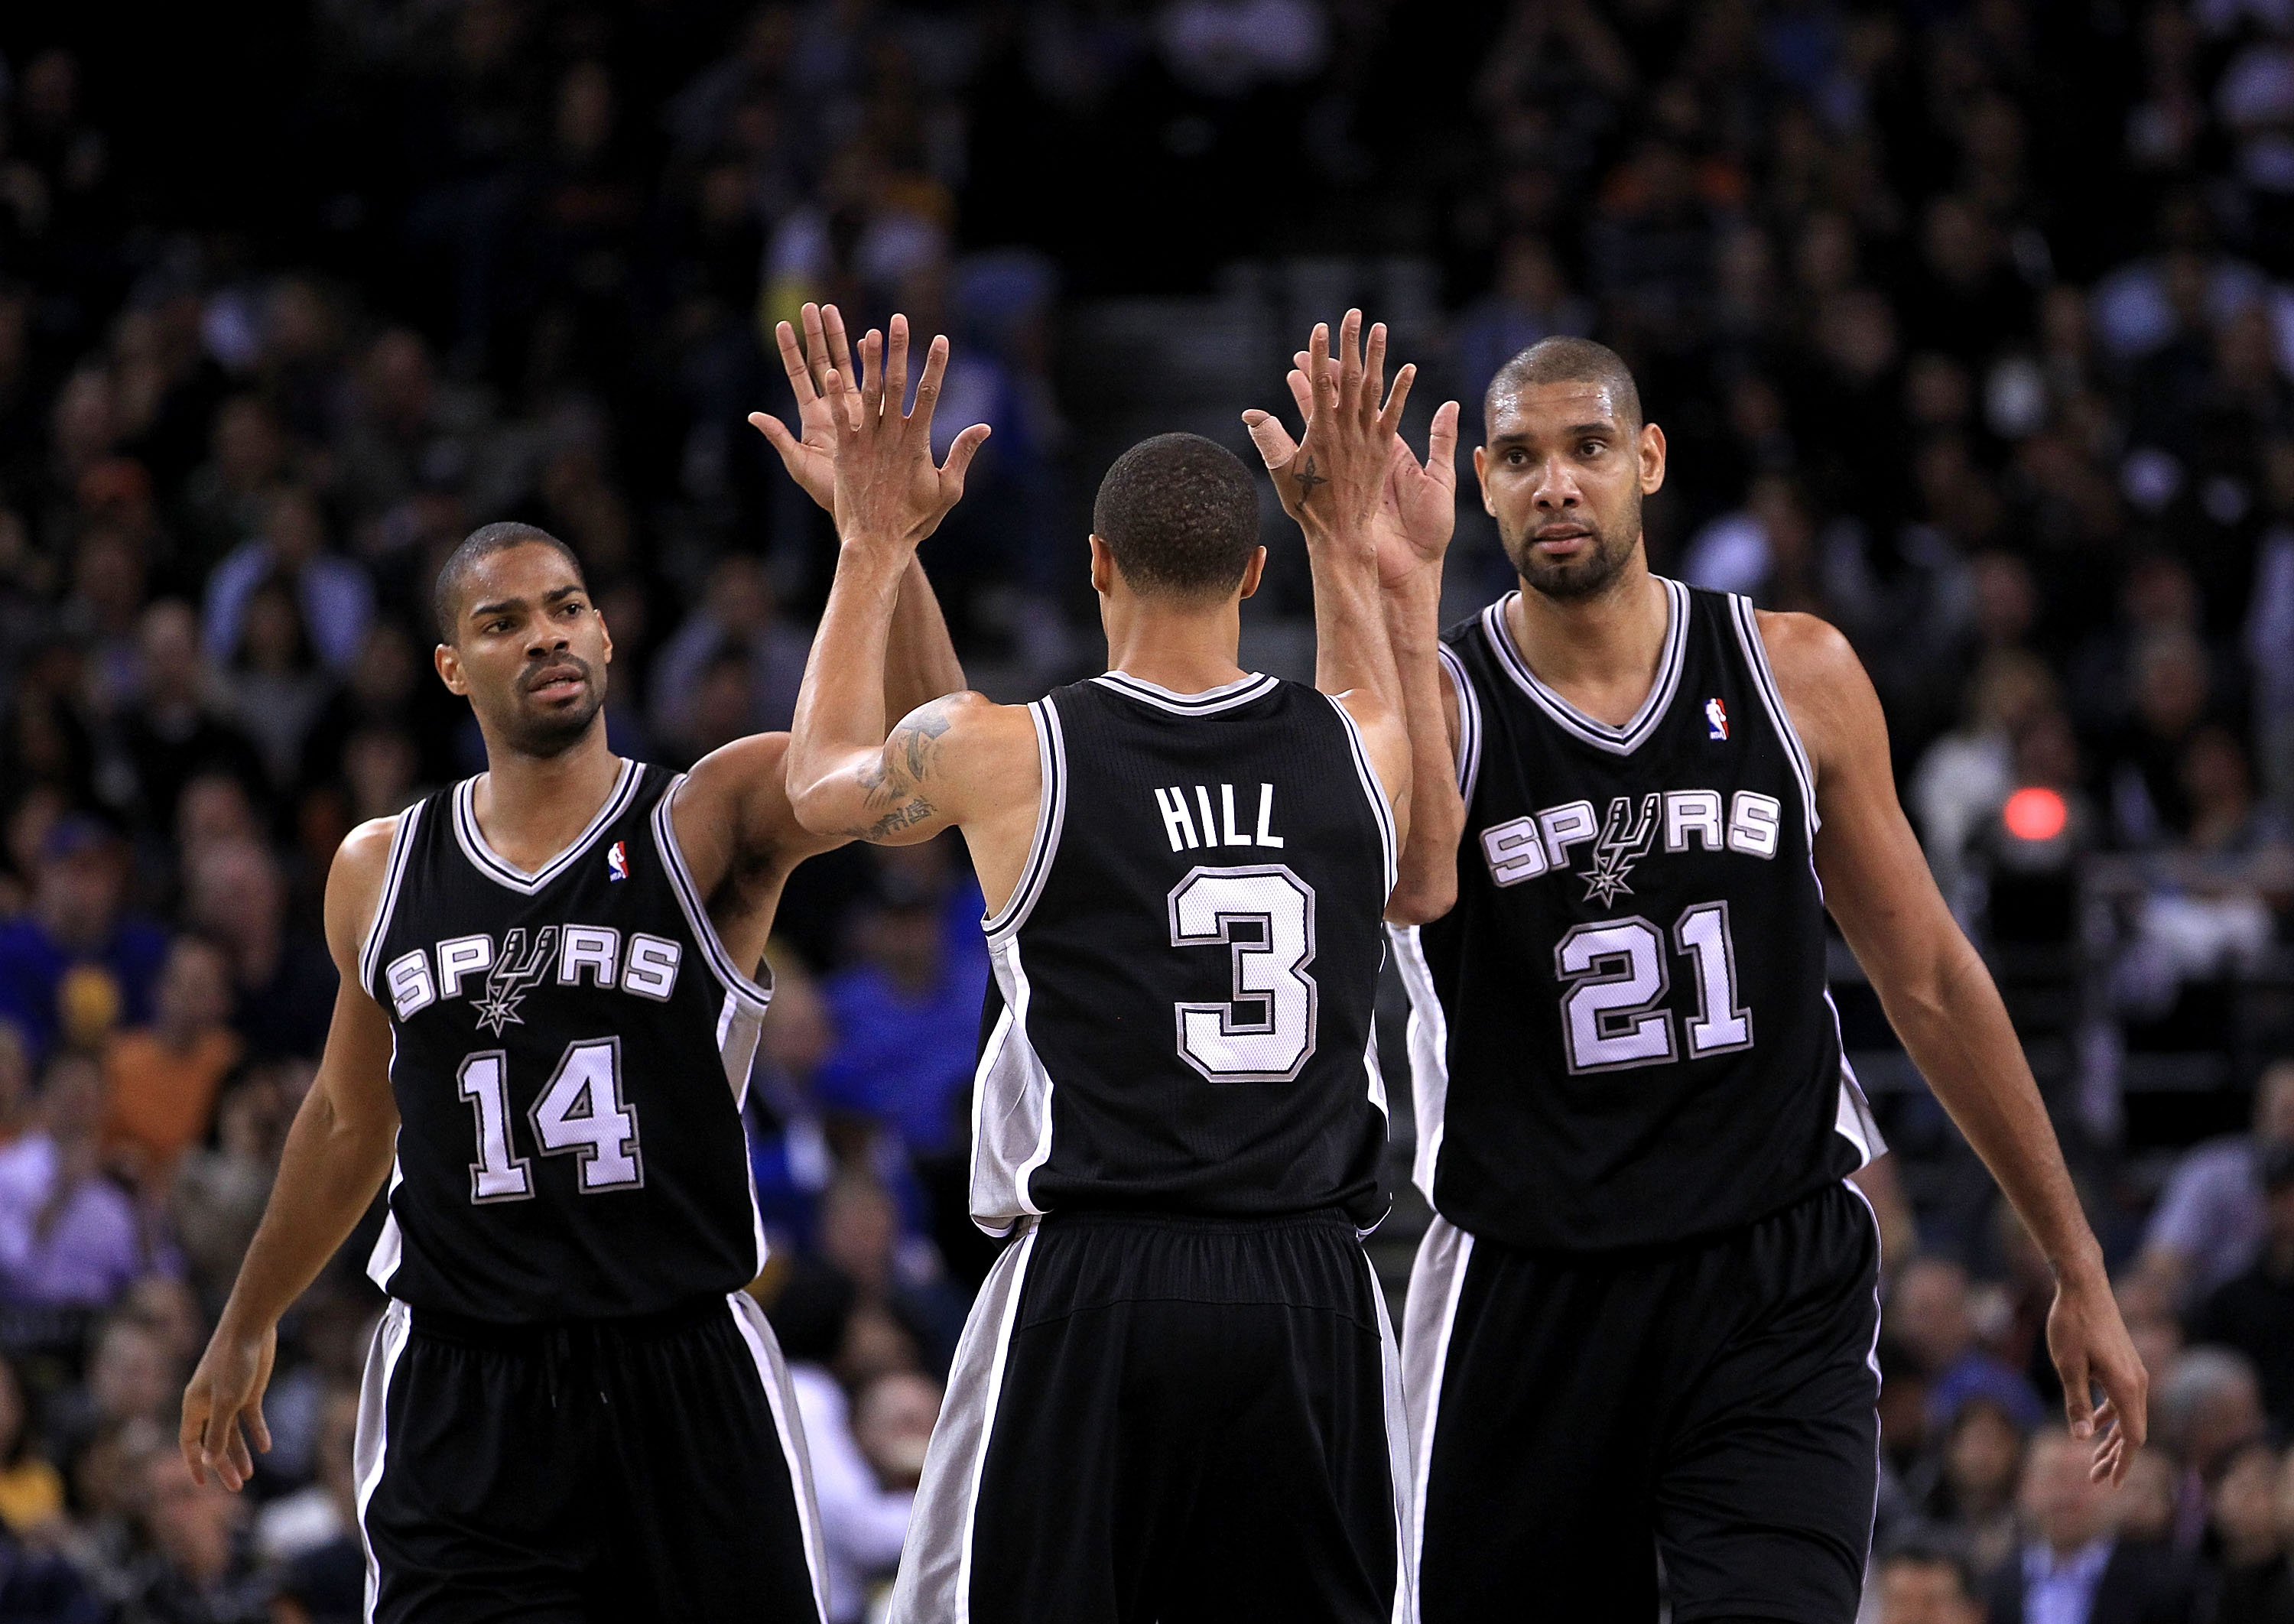 Bleacher Report - How Tim Duncan's old Spurs squad is